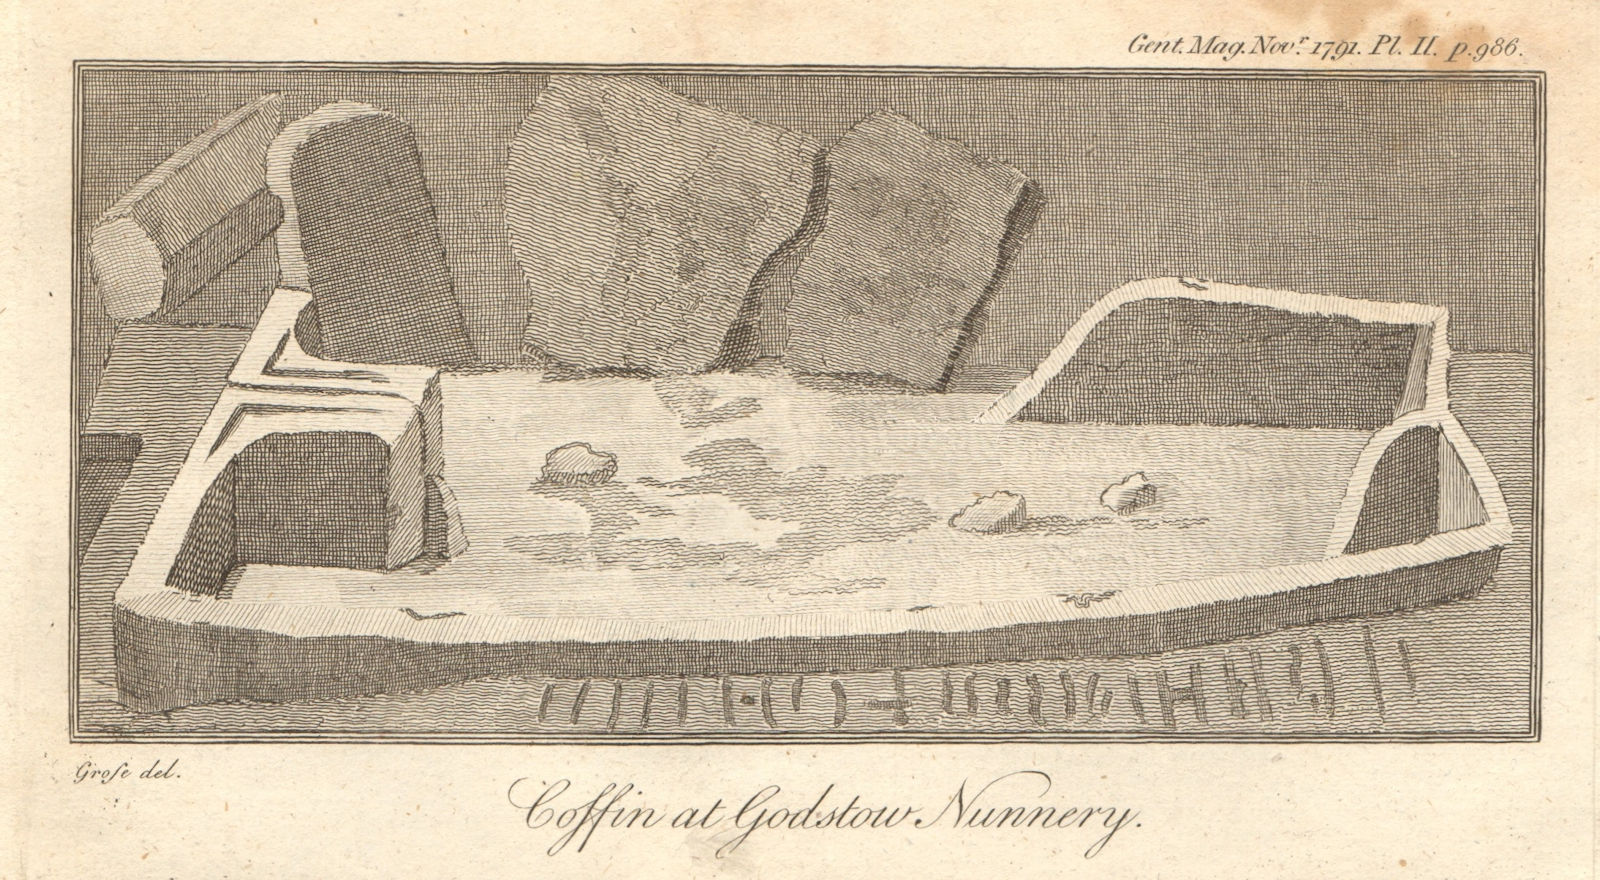 Associate Product Coffin at Godstow Nunnery / Abbey, Oxfordshire 1791 old antique print picture